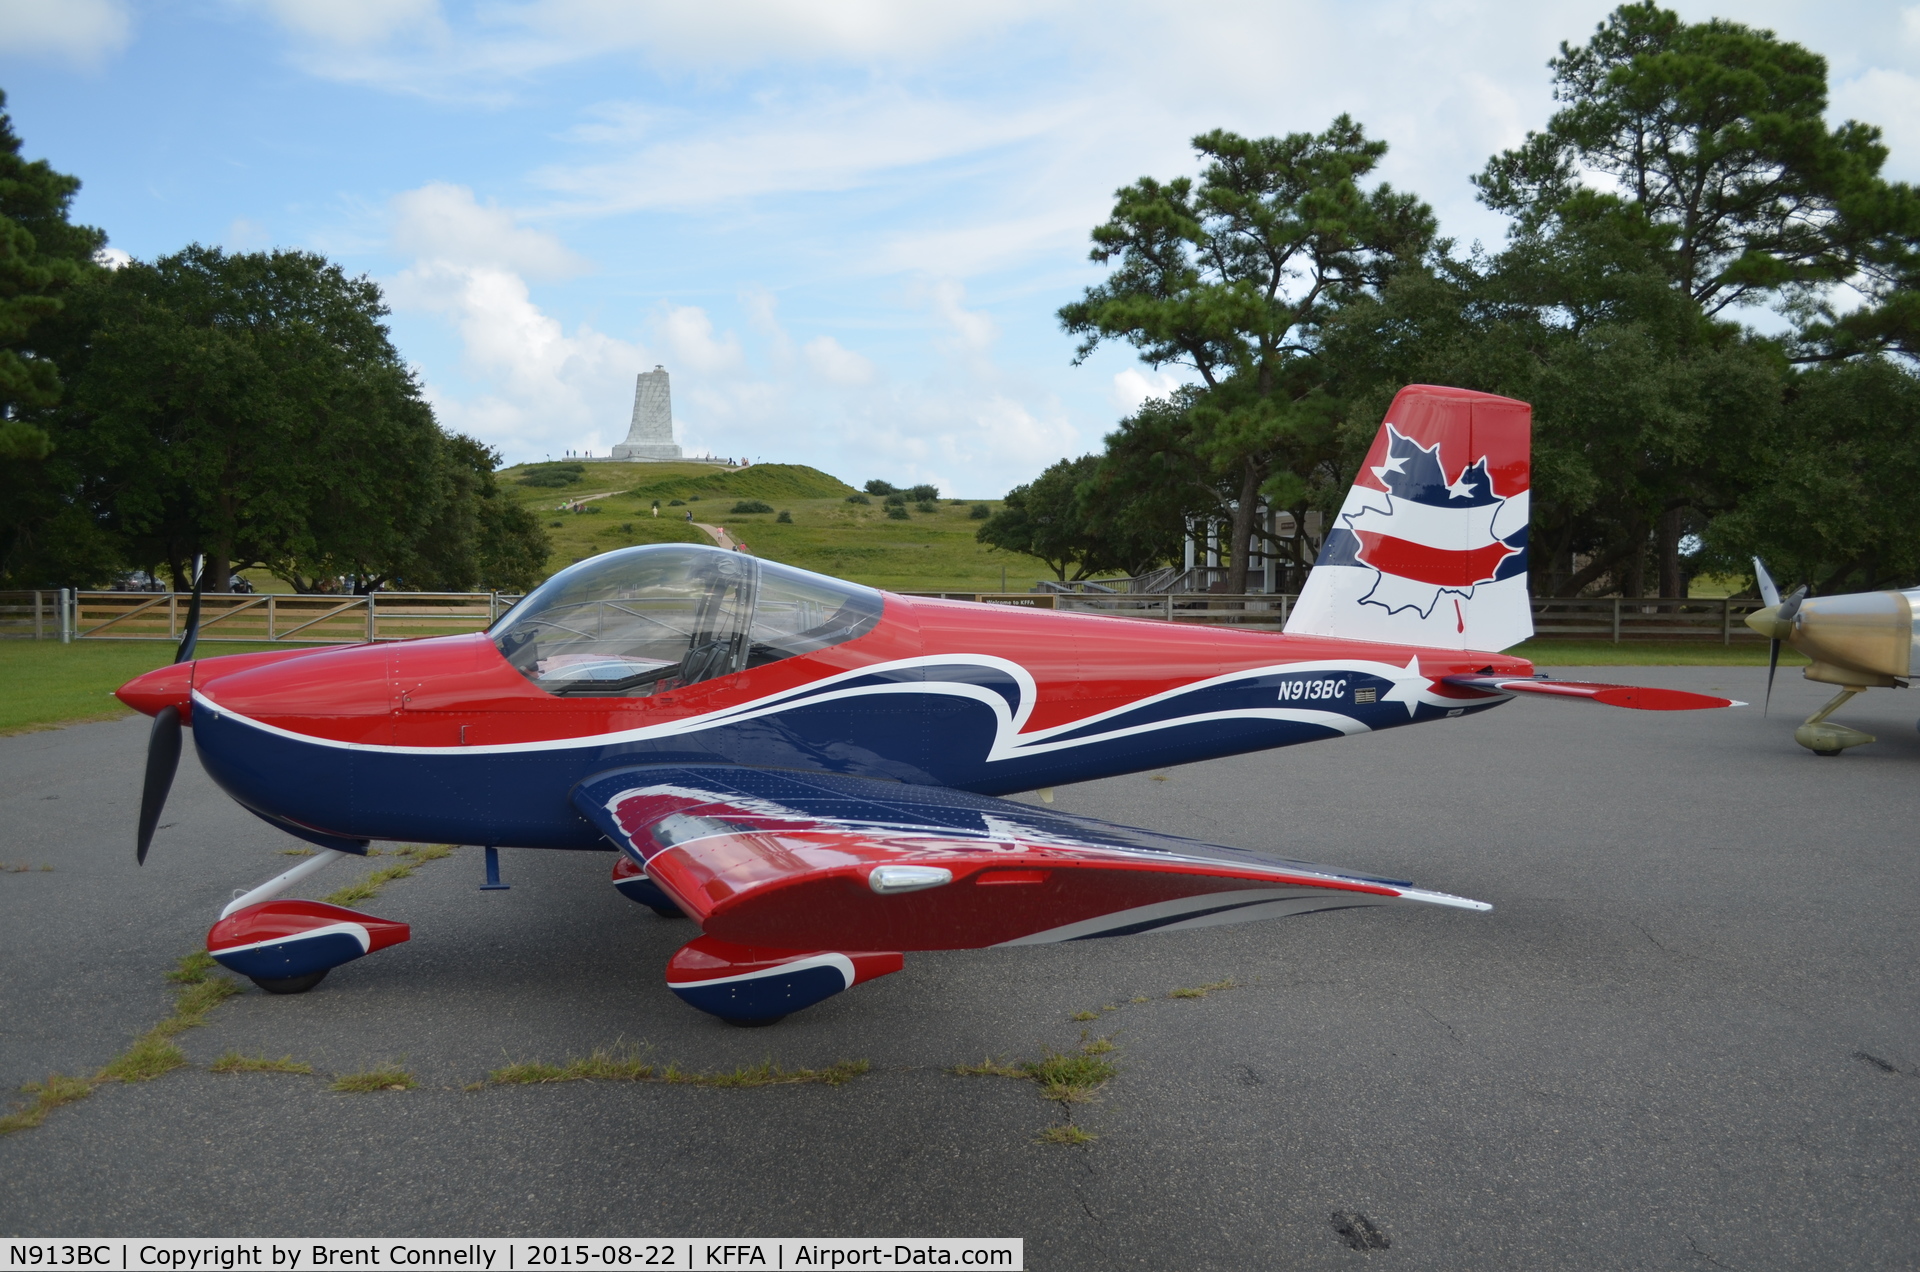 N913BC, 2013 Vans RV-12 C/N 120532, RV-12 N913BC first visit to Kitty Hawk.  August 2015